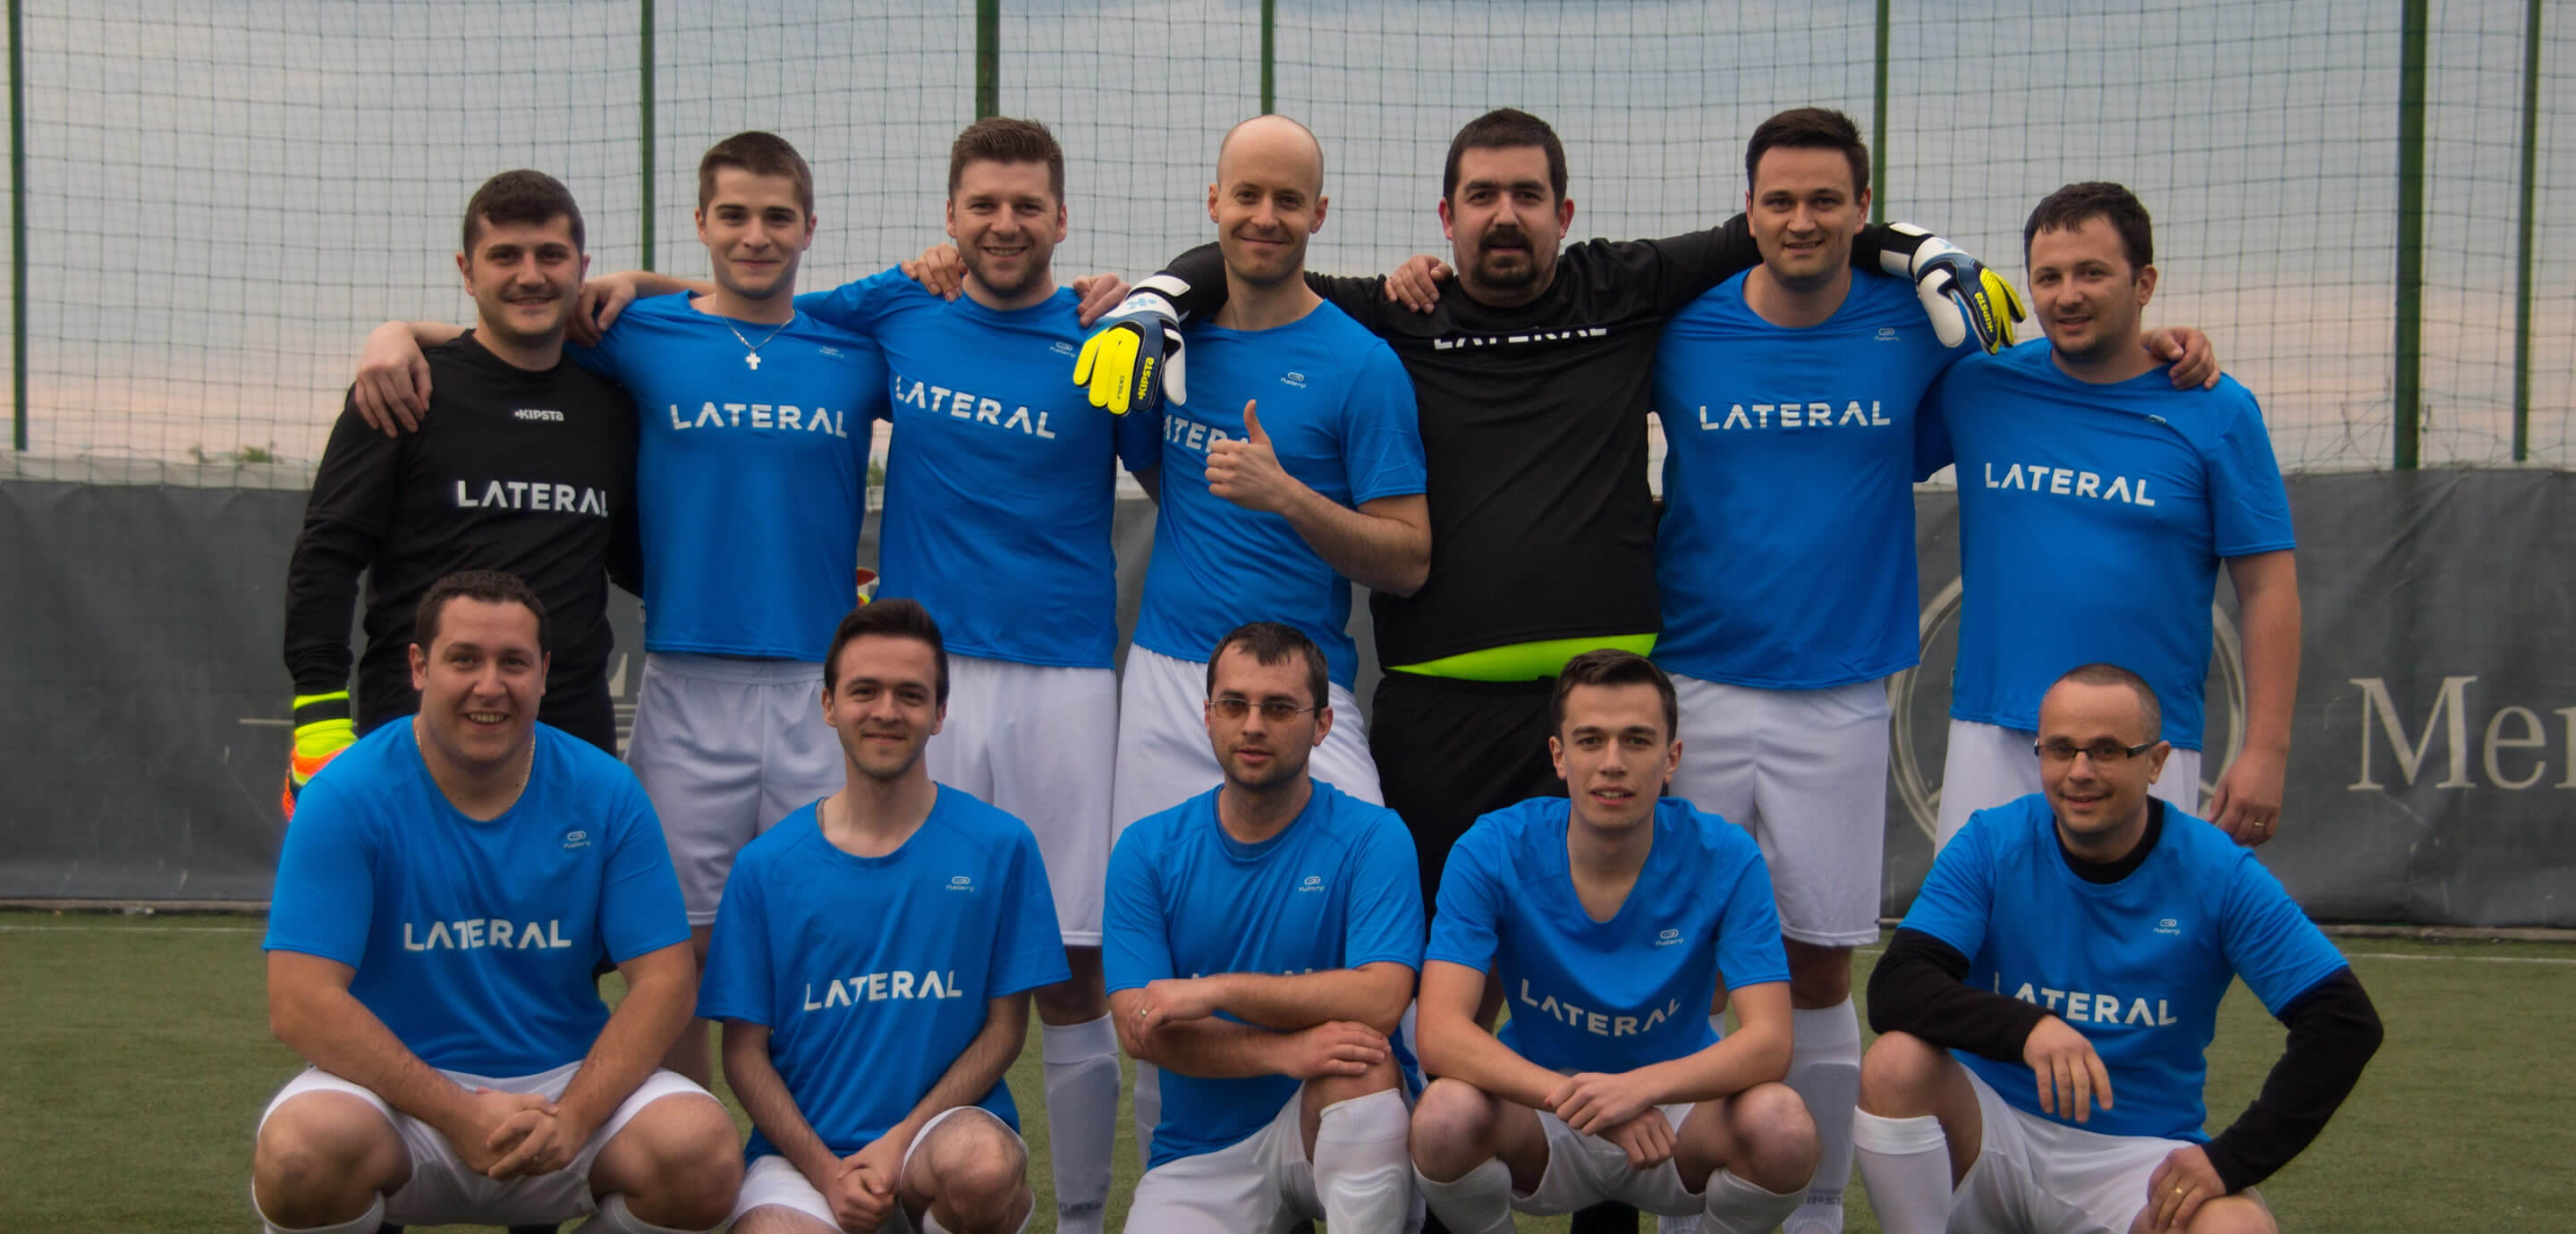 Office - Mures - Our ambitious soccer team - part of the local IT Soccer League